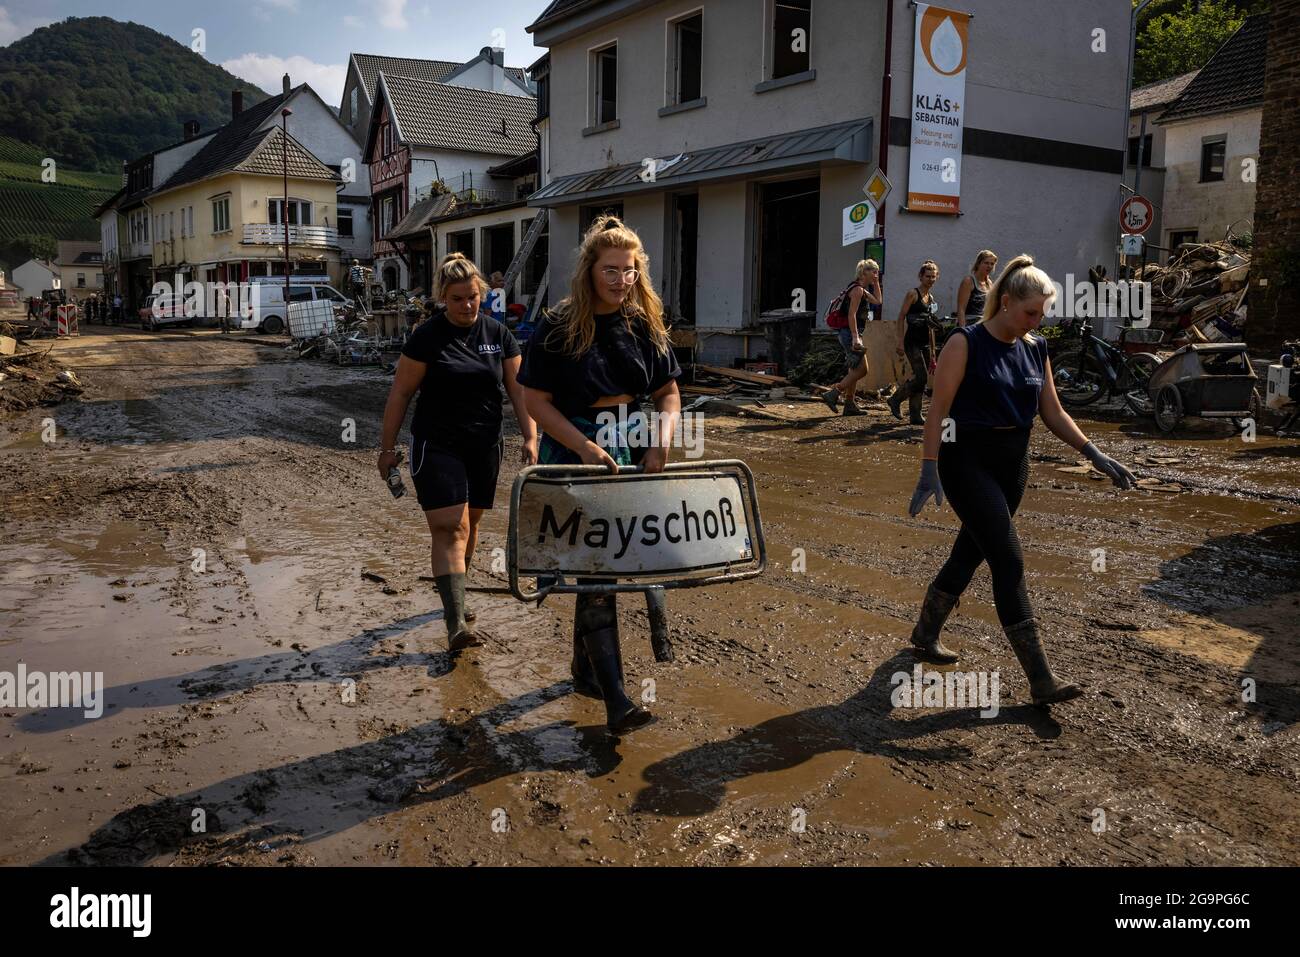 Flood disaster on the Ahr River, as seen here in Mayschoss in Rheinland-Pfalz in Germany. The town and the entire Ahr valley have been very badly damaged. Volunteers and relief organizations have been busy for days with the cleanup work, which will continue for months and years. Stock Photo